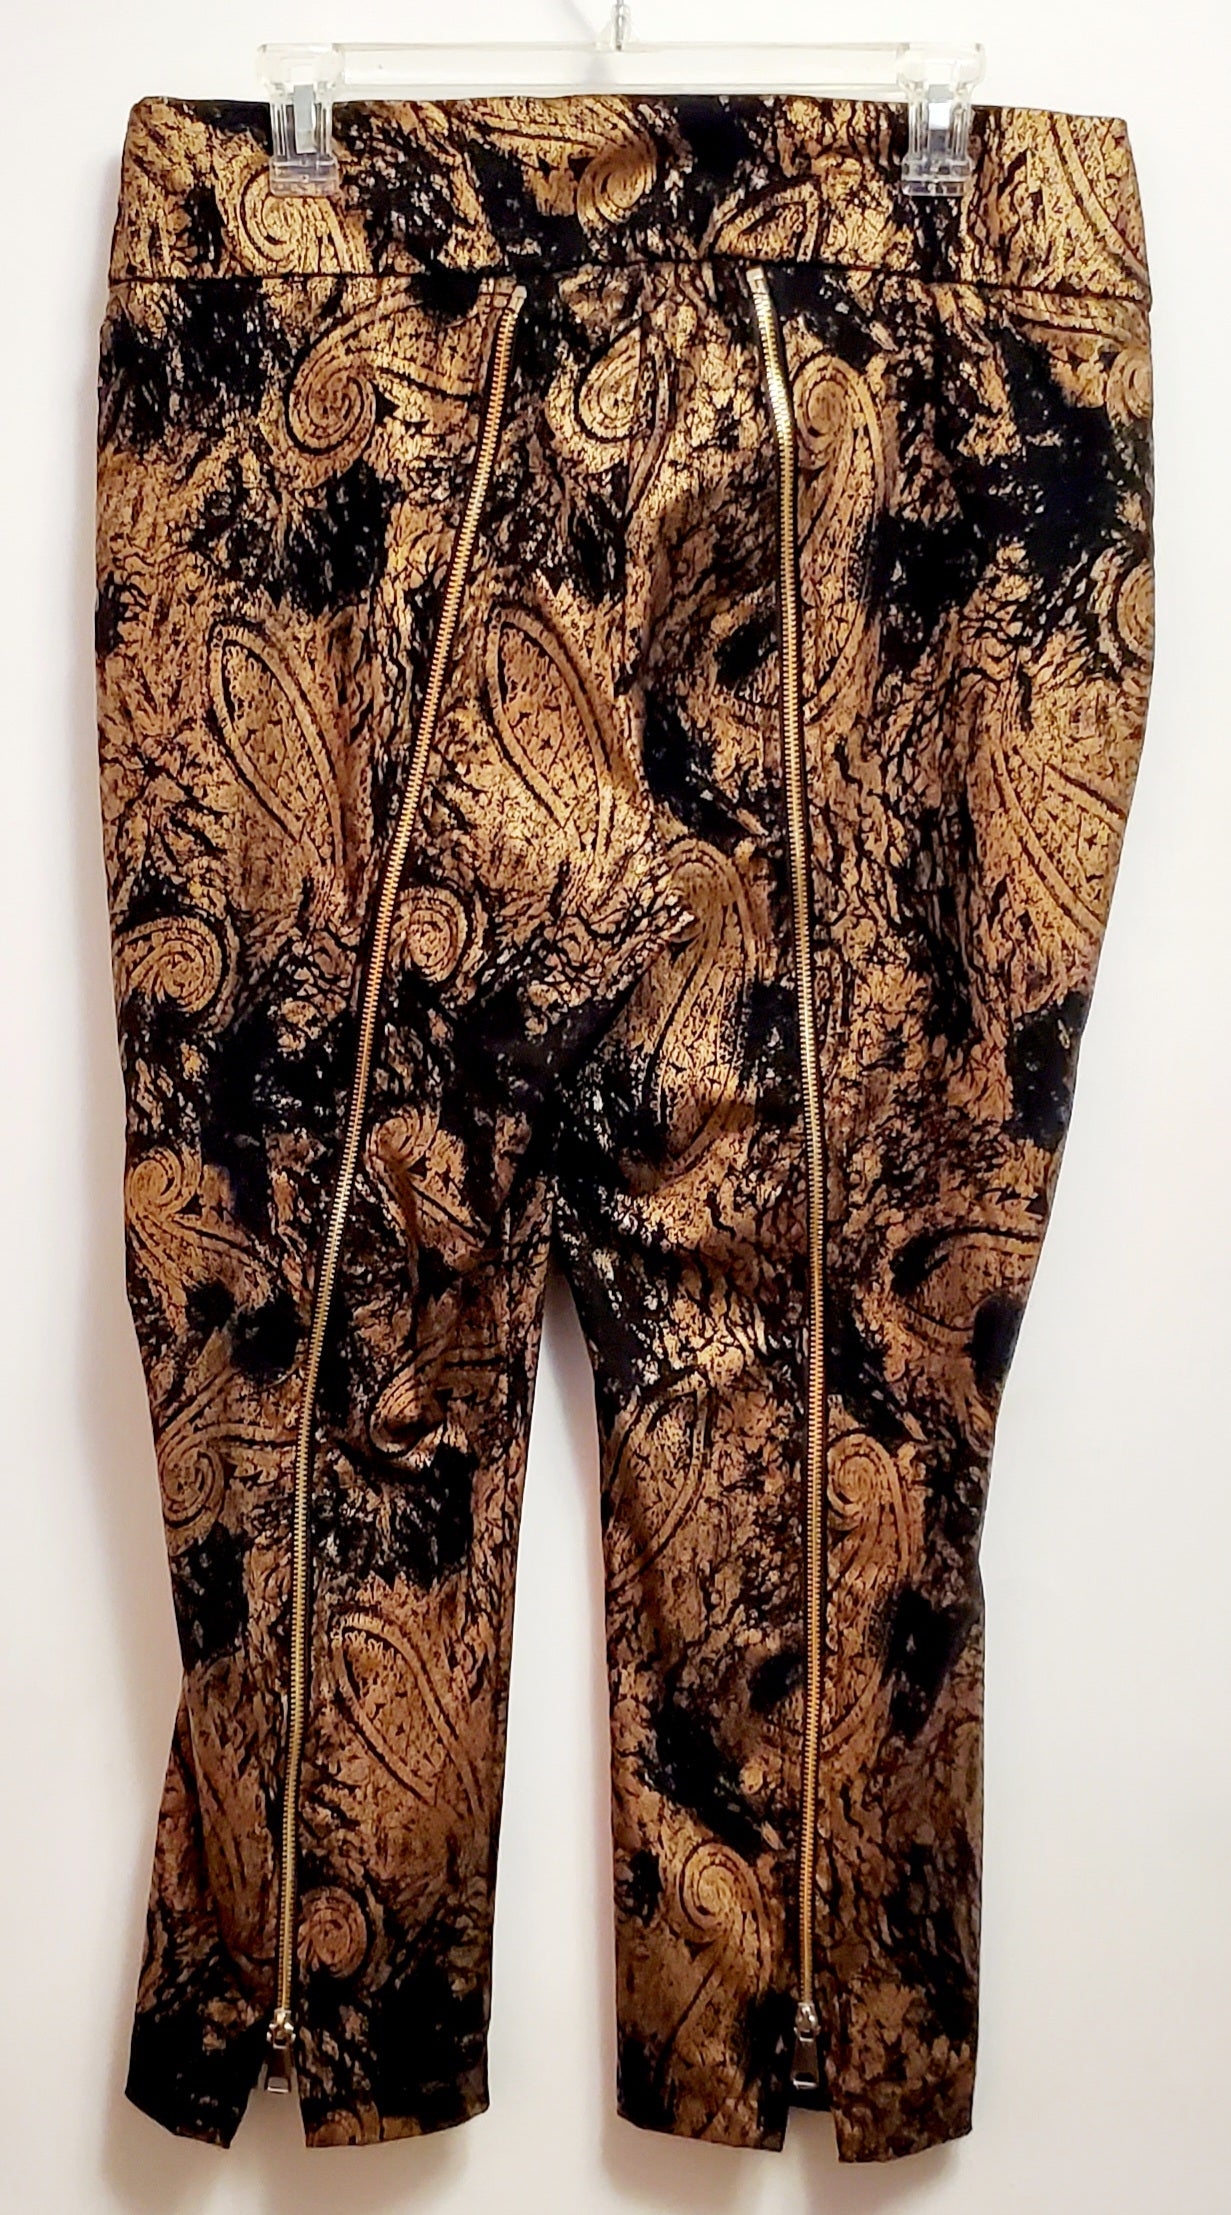 Back view of cropped pants of 2 piece black and gold paisley suit with lace wing epaulettes